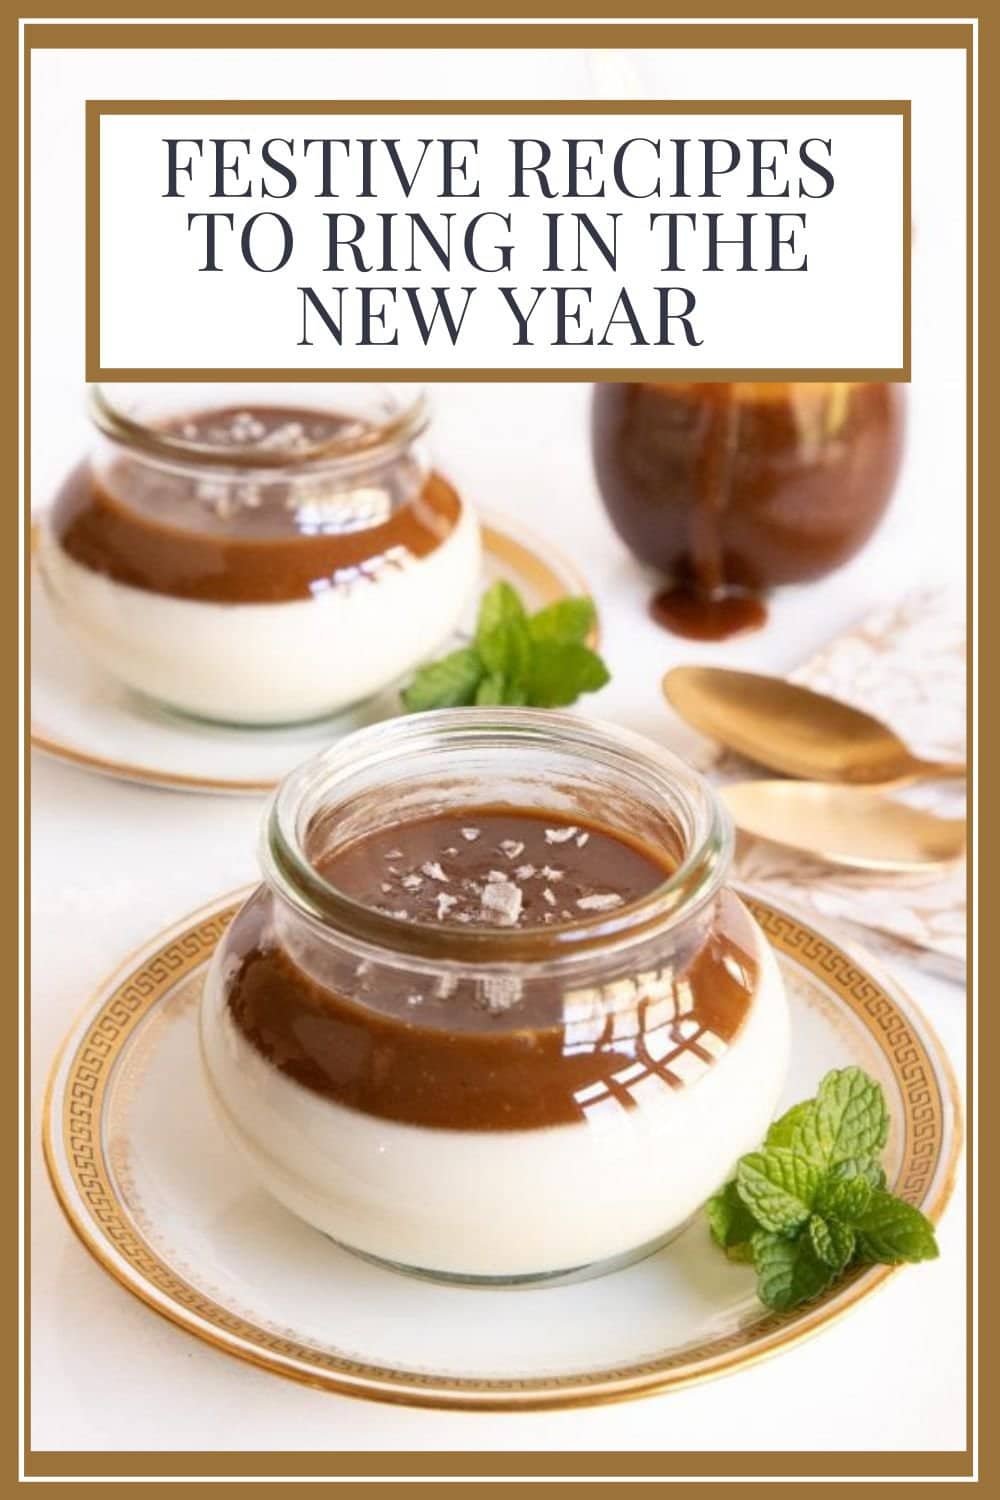 Ring in the New Year Deliciously with These Easy Celebration Recipes!